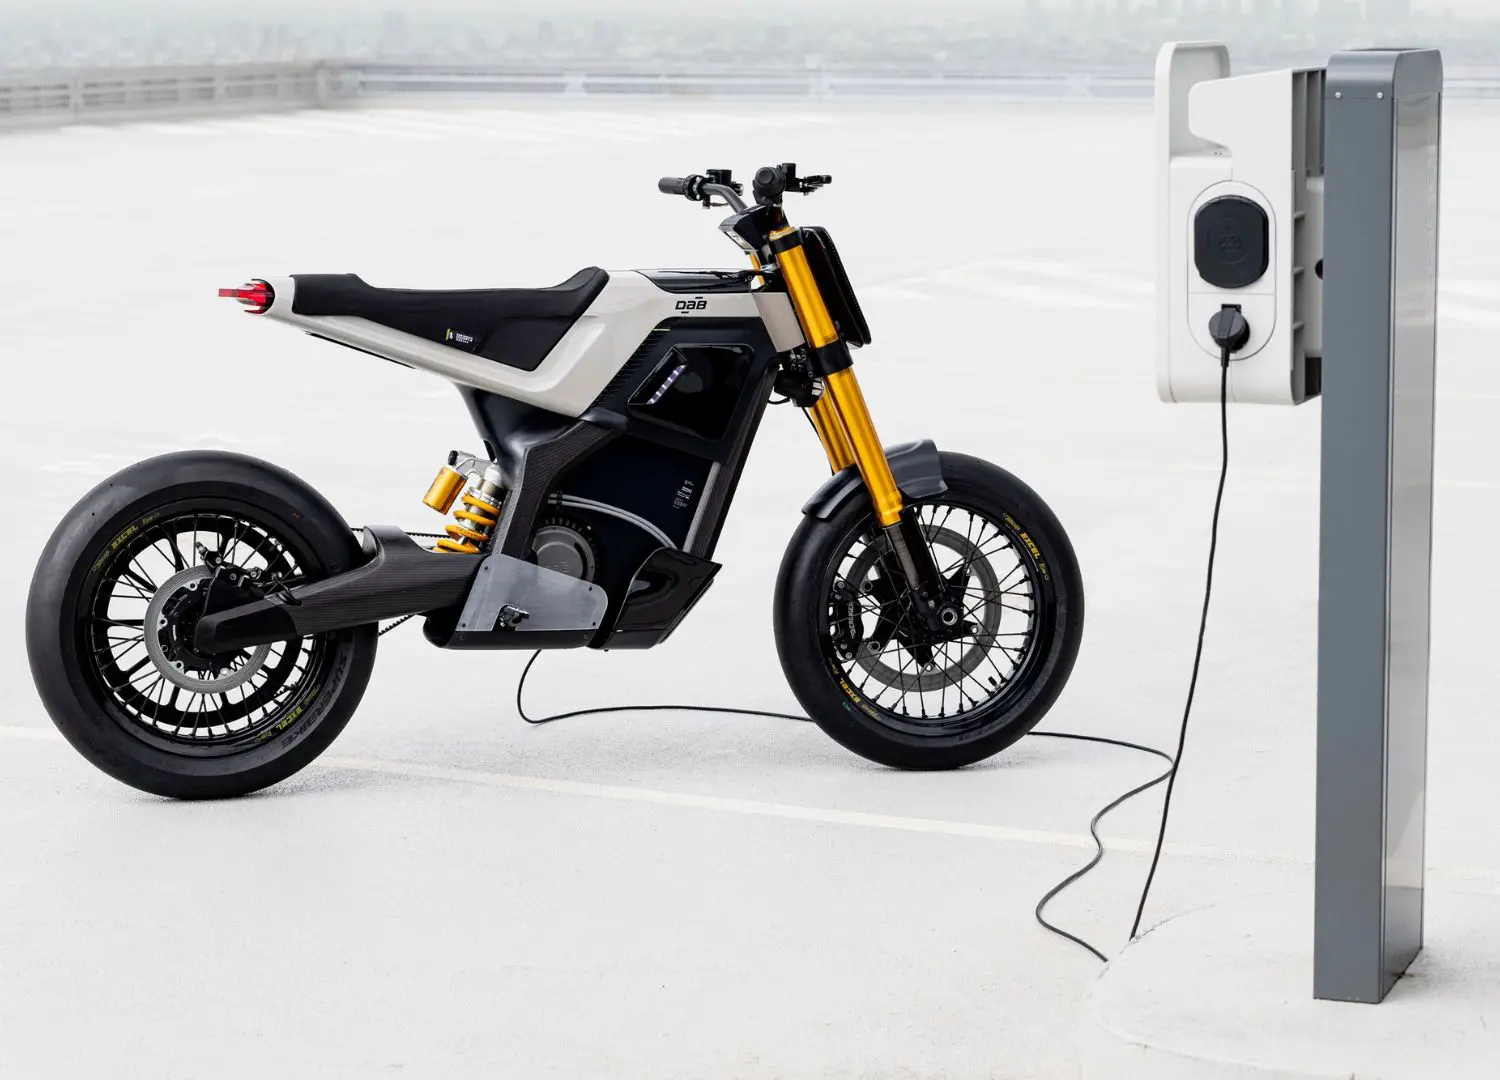 European Product Design Awards _ Concept-E electric motorcycle by Outercraft